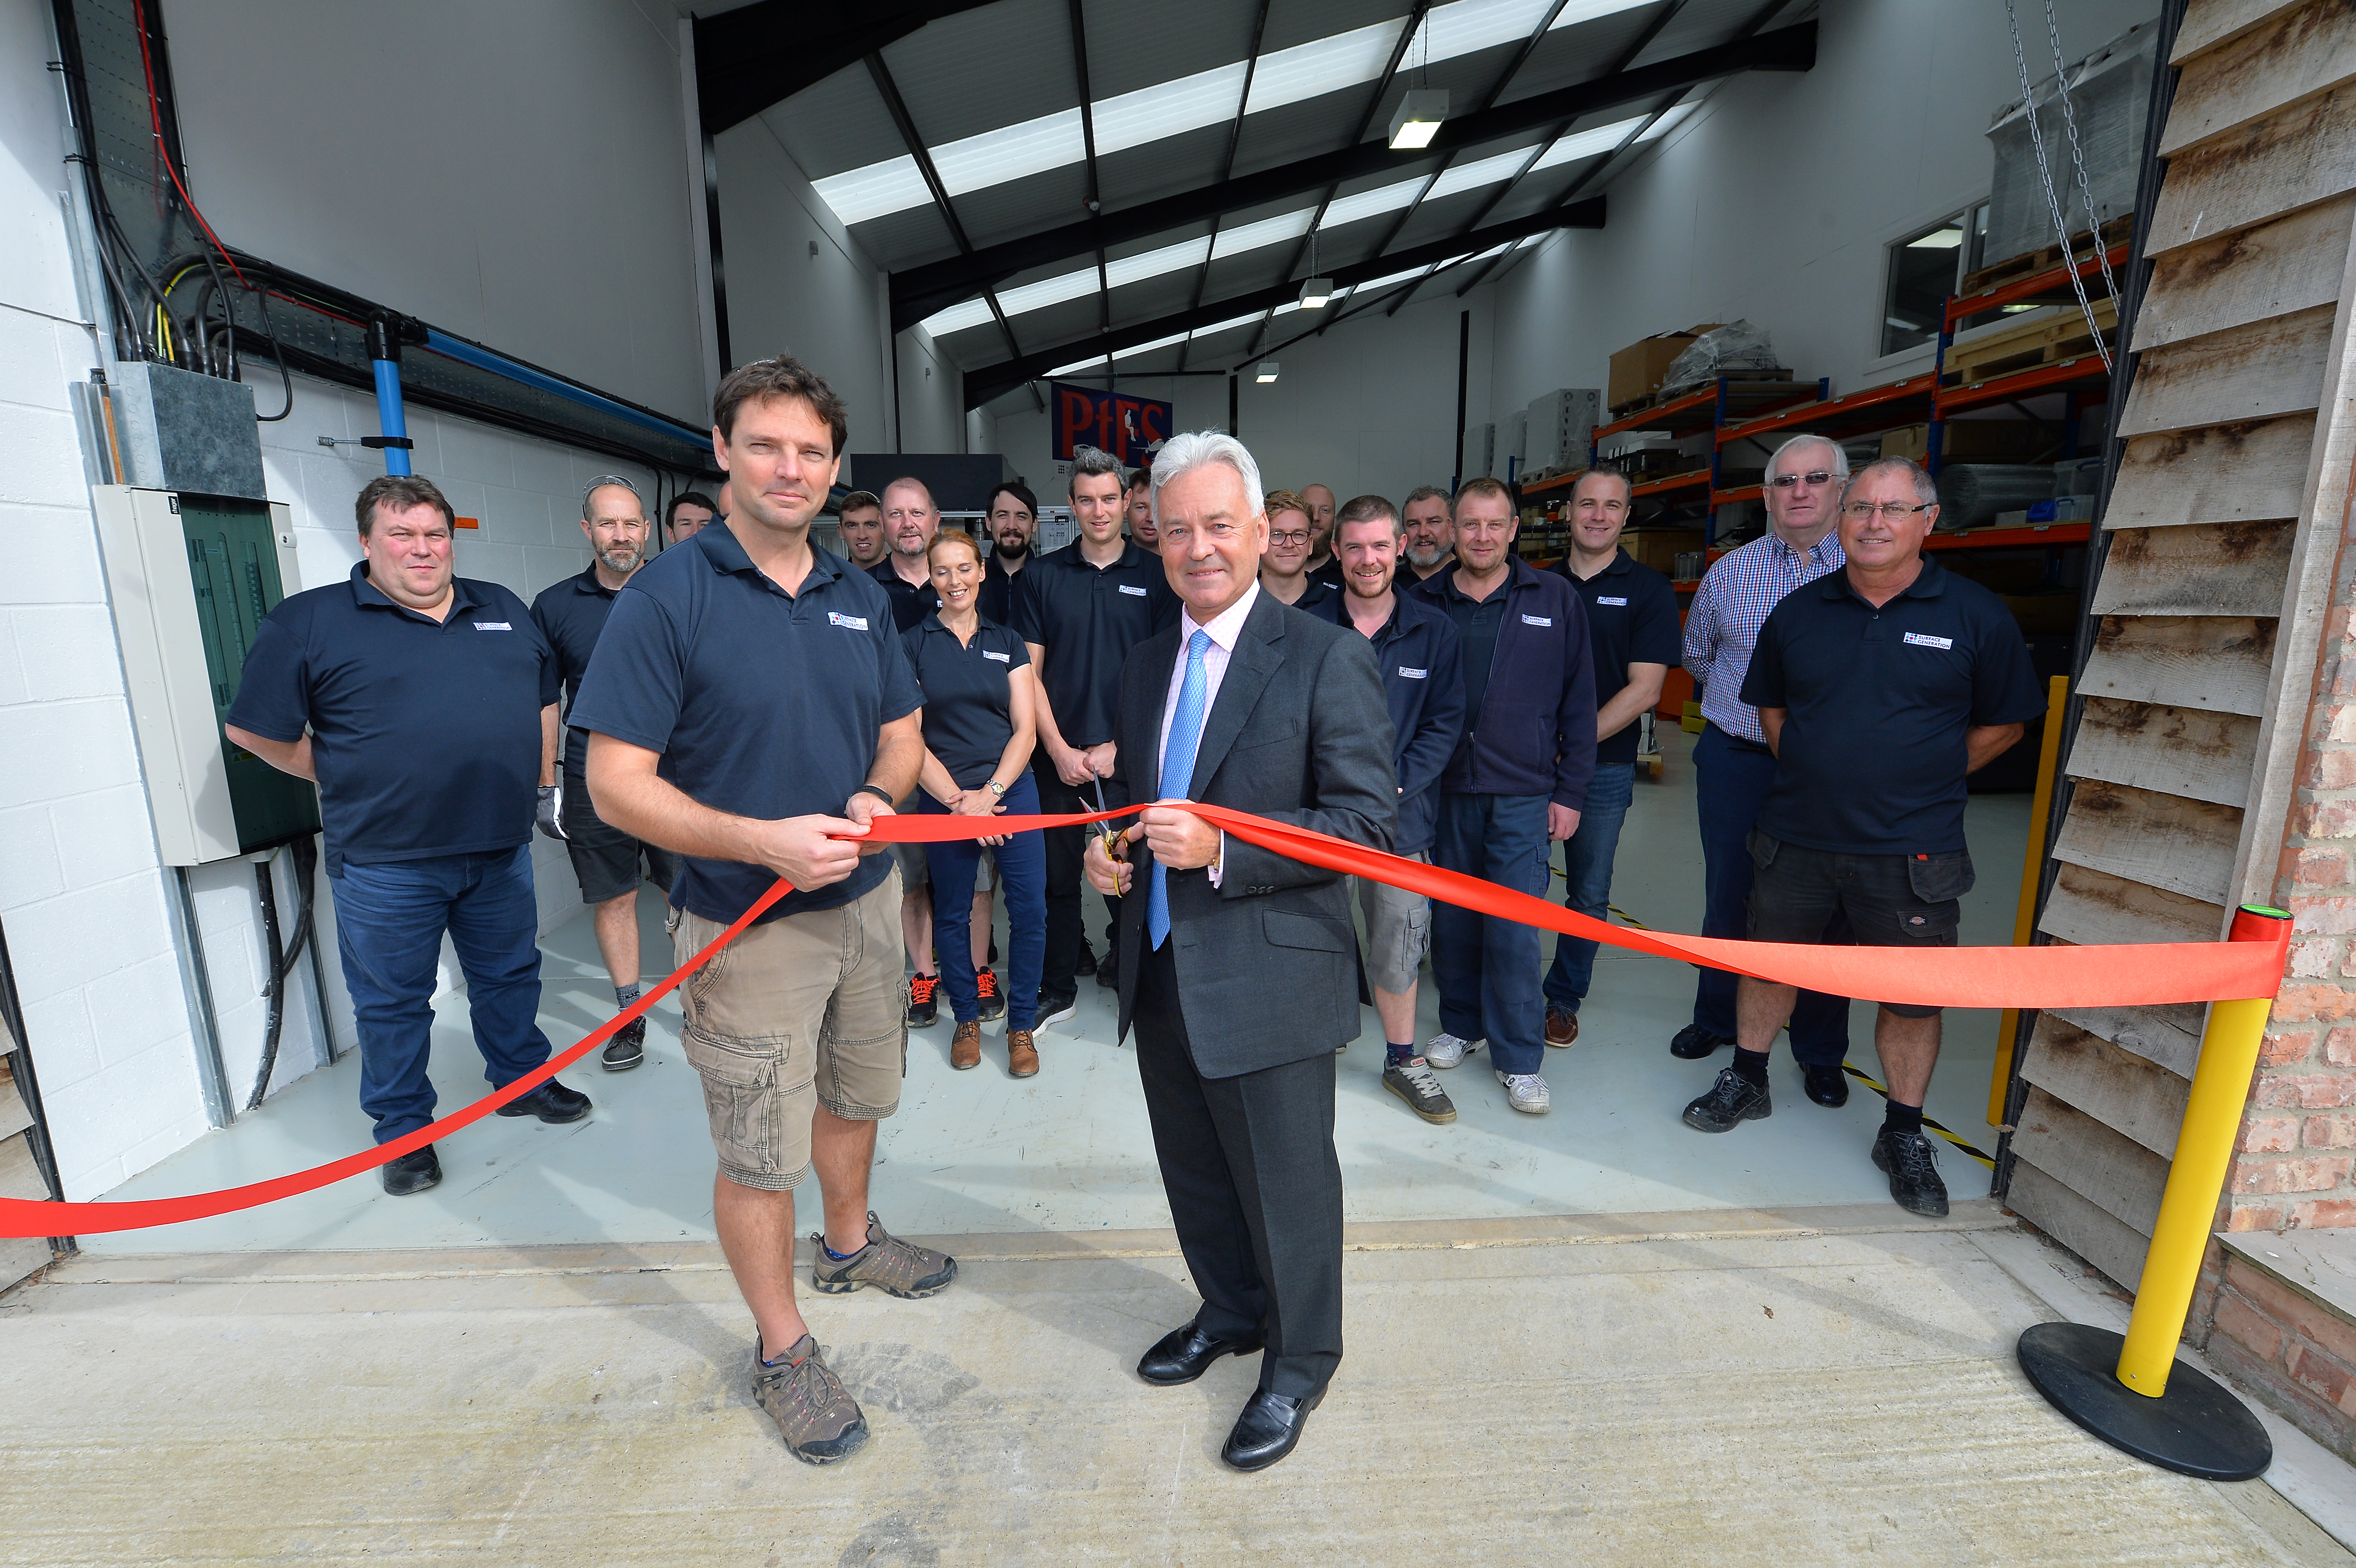 Sir Alan Duncan MP, who opened the facility, and chief exec Ben Halford cutting the ribbon.